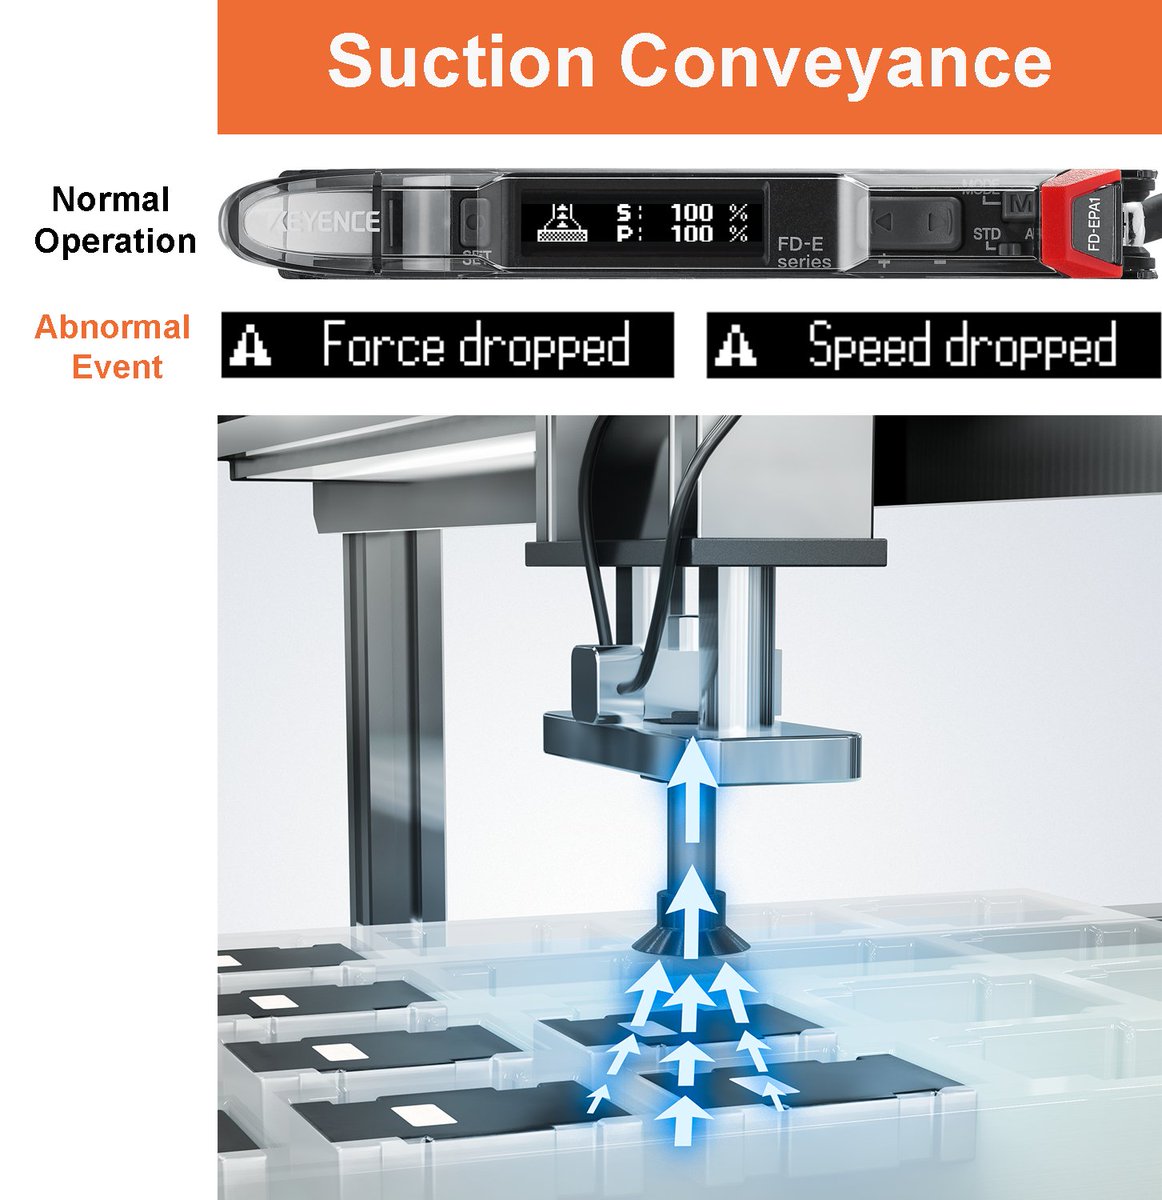 Check out how the FD-EP Series performs predictive maintenance in its application mode for suction conveyance! Easily detect drops in speed or force before downtime or larger issues occur! Learn more: keyence.com/05232024/FD-EP… #KEYENCE